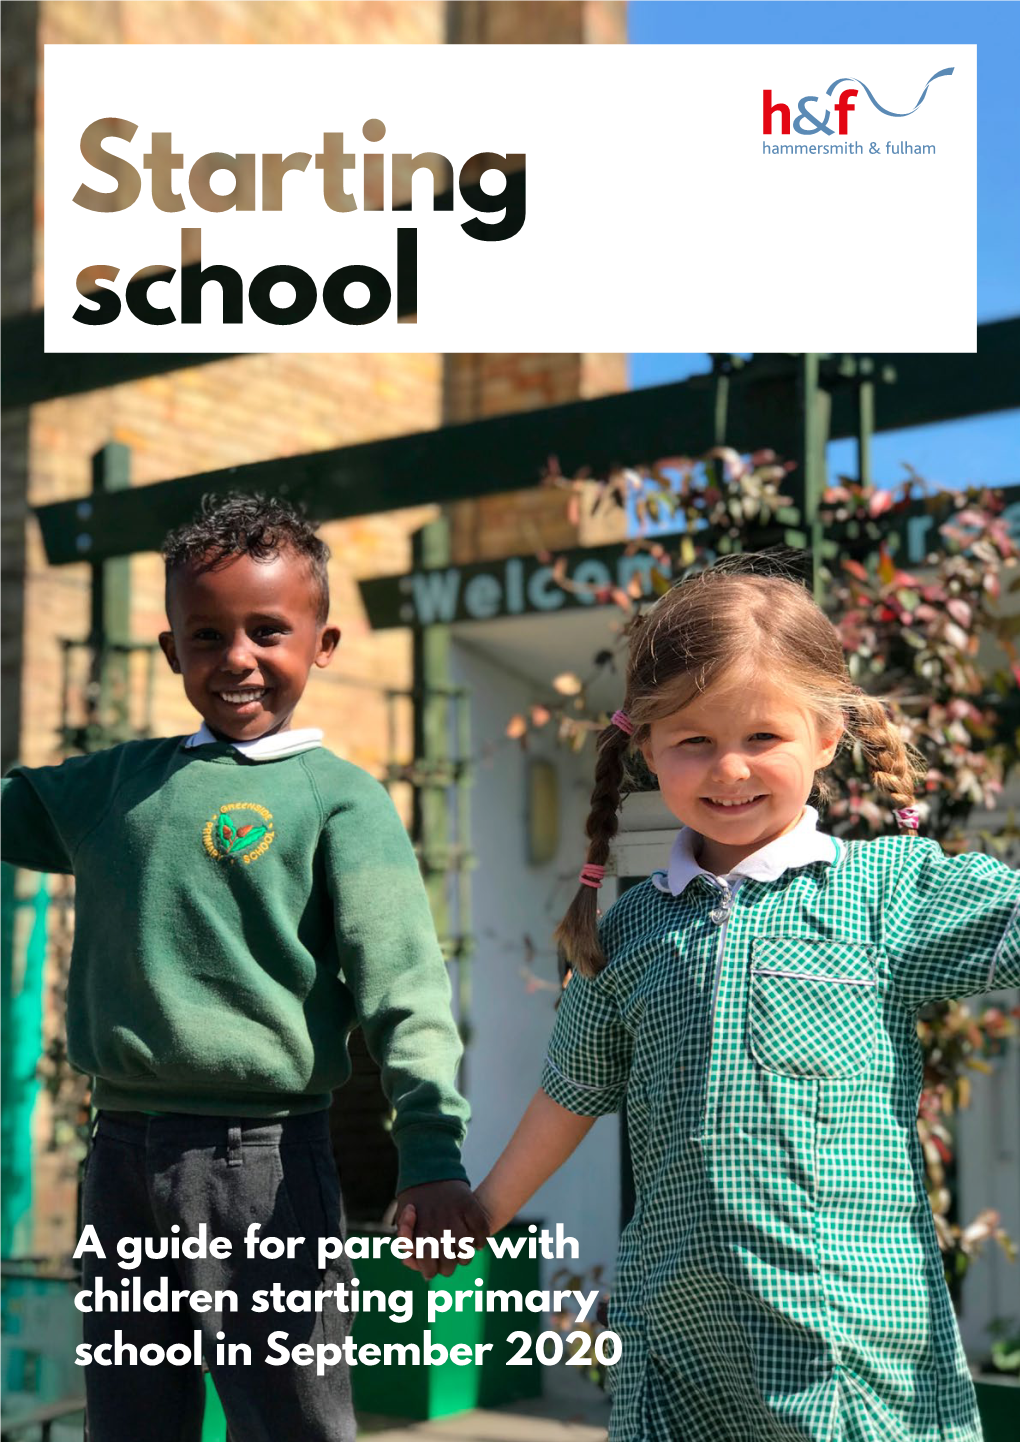 A Guide for Parents with Children Starting Primary School in September 2020 Apply Online: Eadmissions